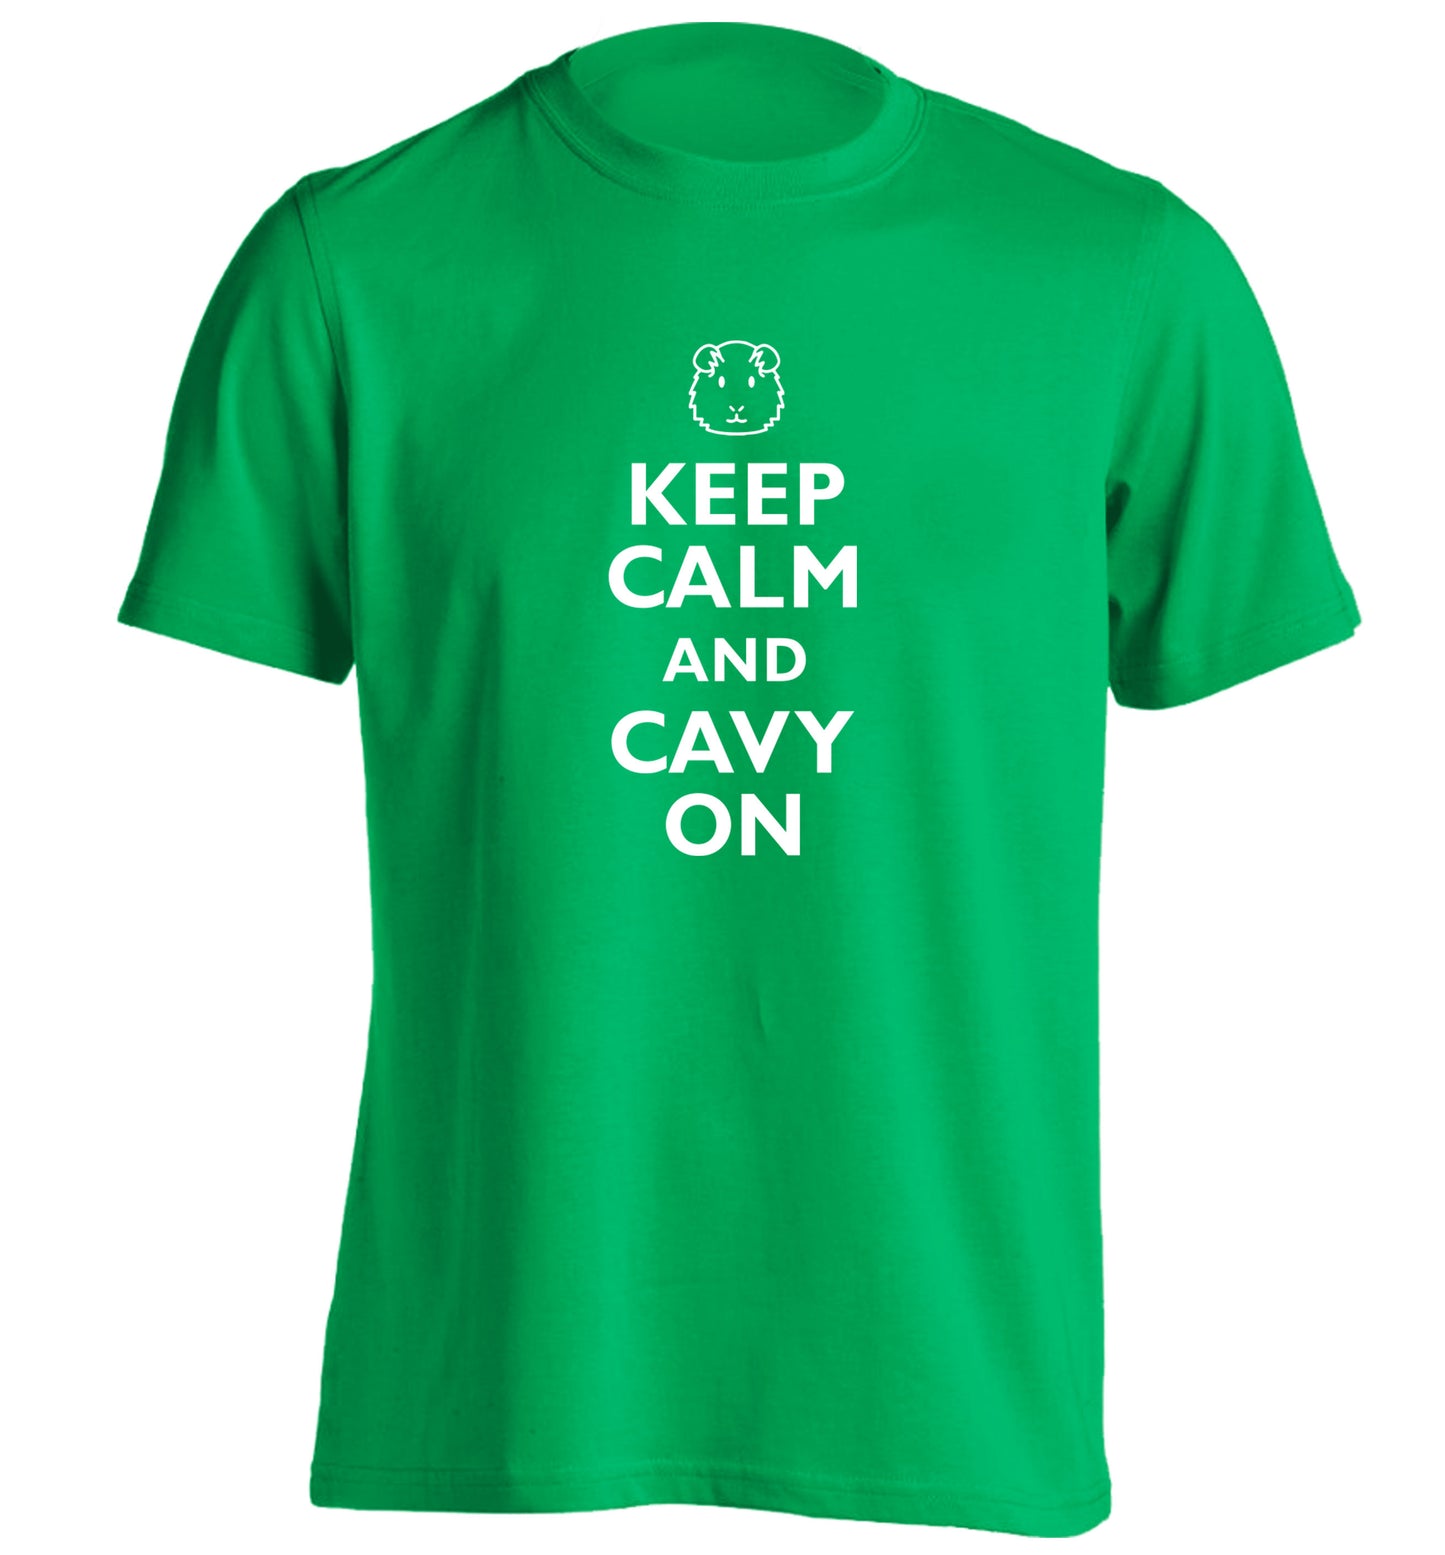 Keep calm and cavvy on adults unisex green Tshirt 2XL